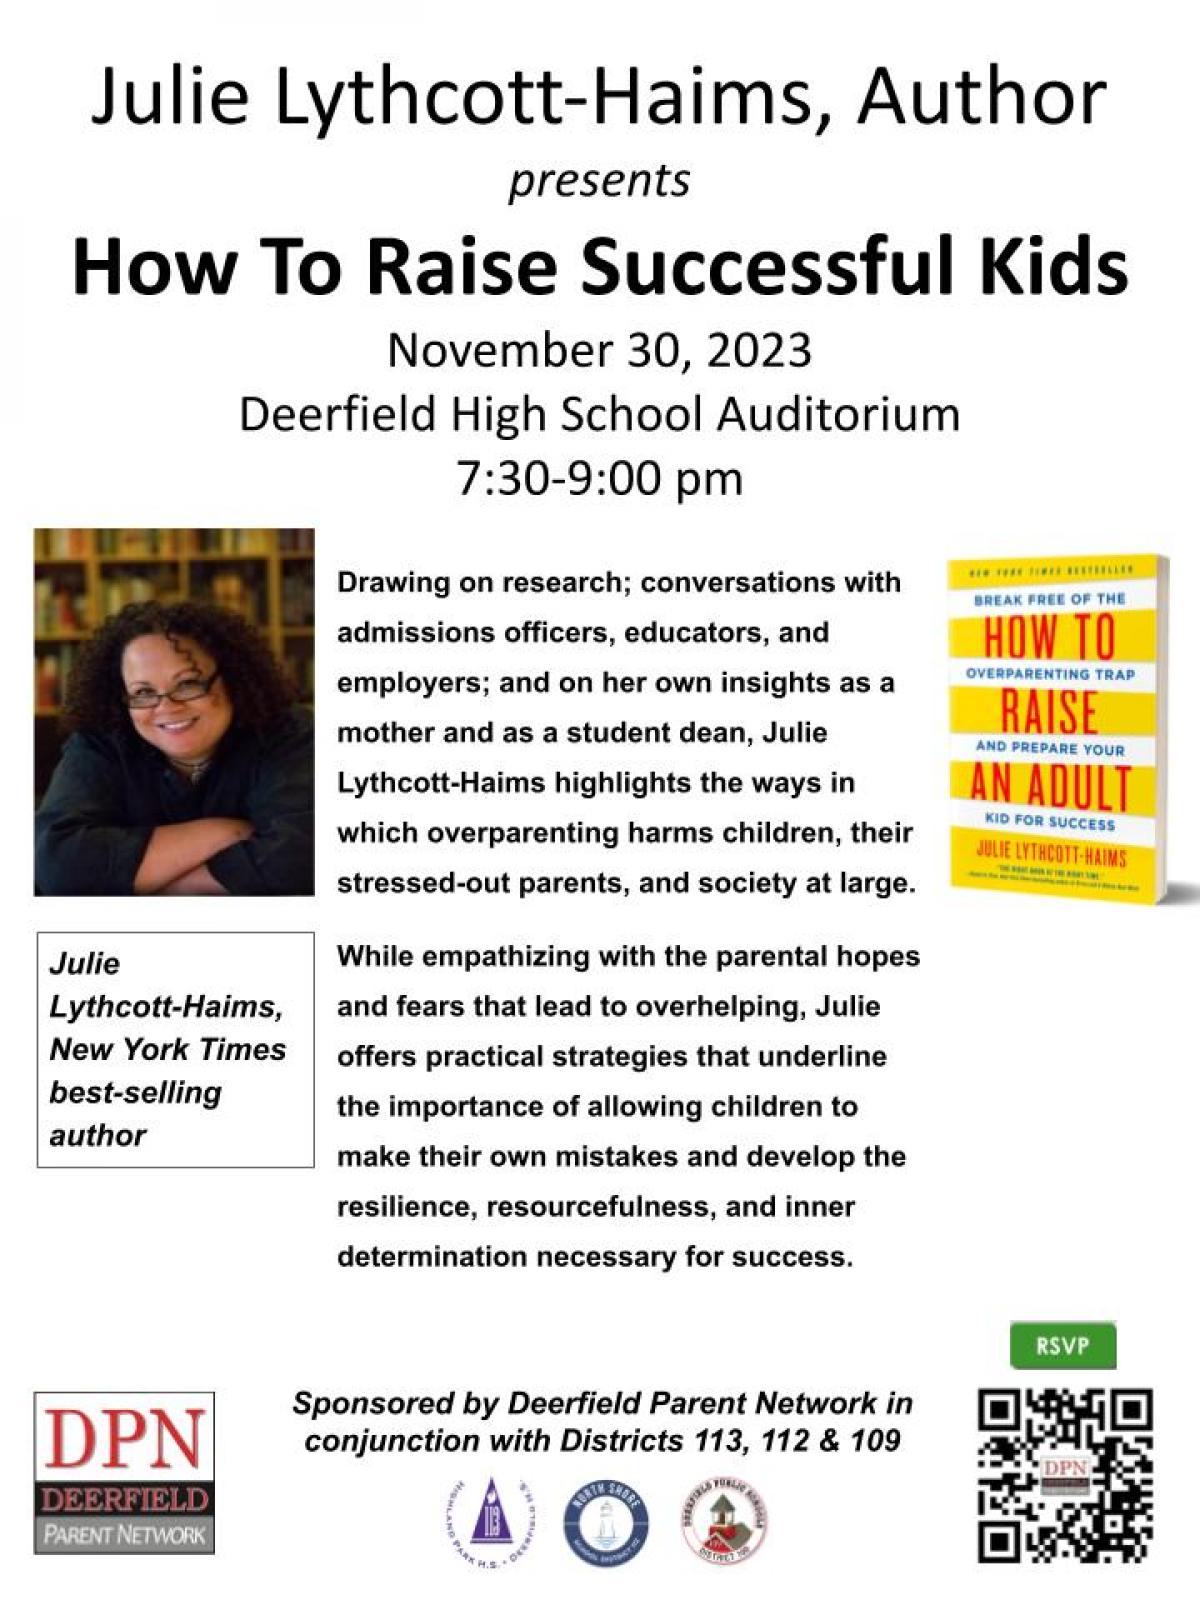 Julie Lythcott-Haim’s presents, “How to Raise Successful Kids” on November 30th at 7:30 pm at Deerfield High School’s Auditorium